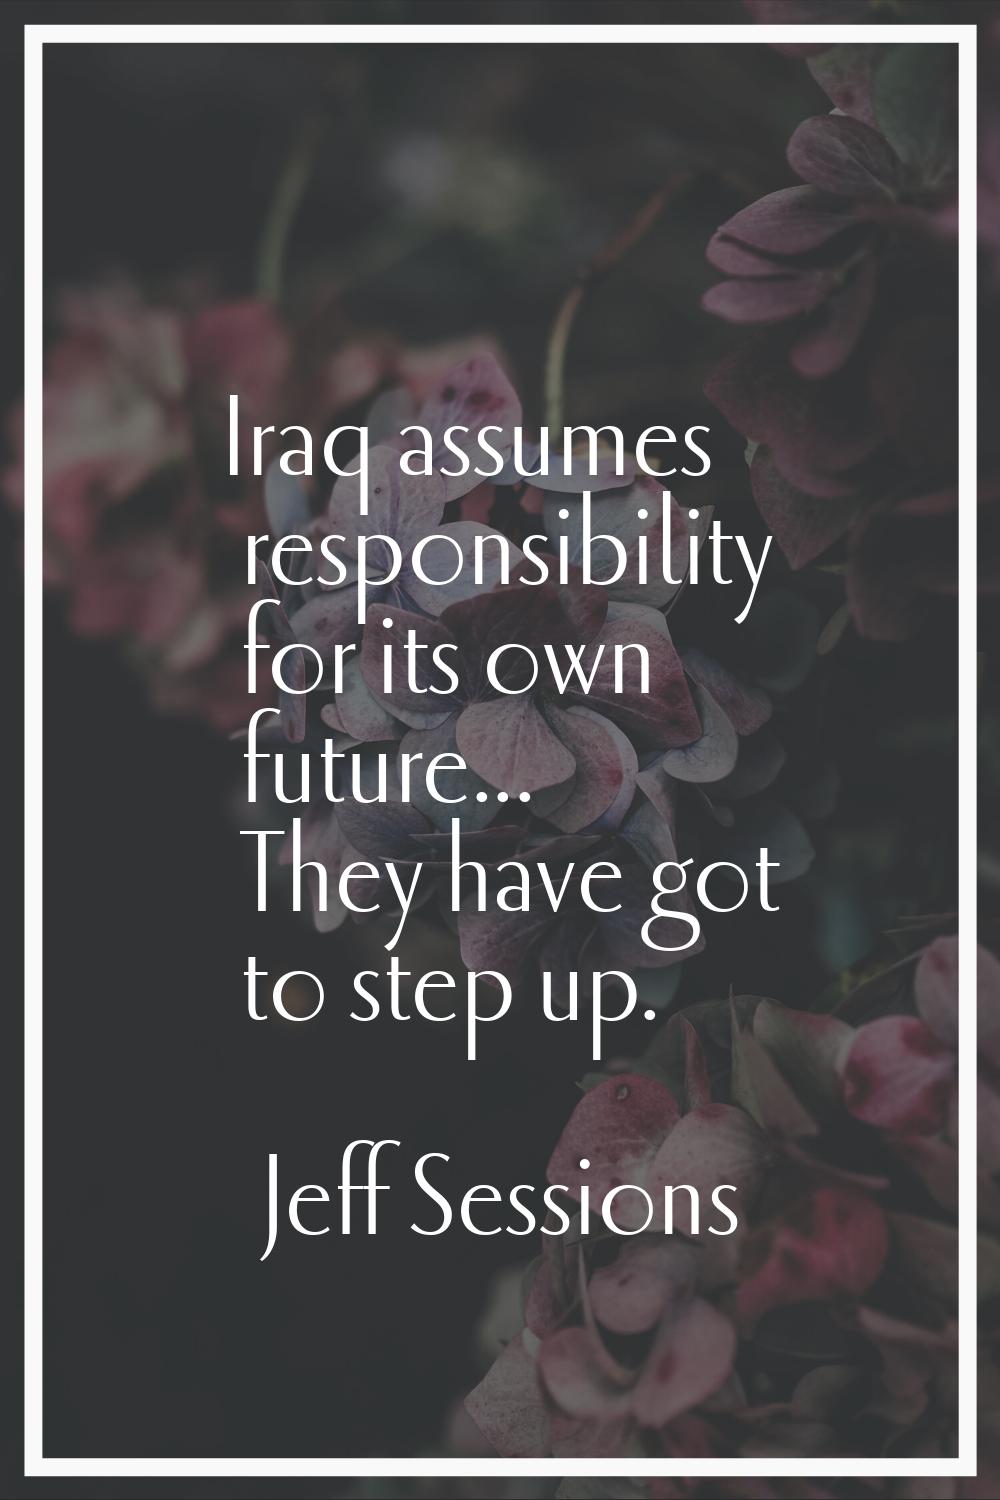 Iraq assumes responsibility for its own future... They have got to step up.